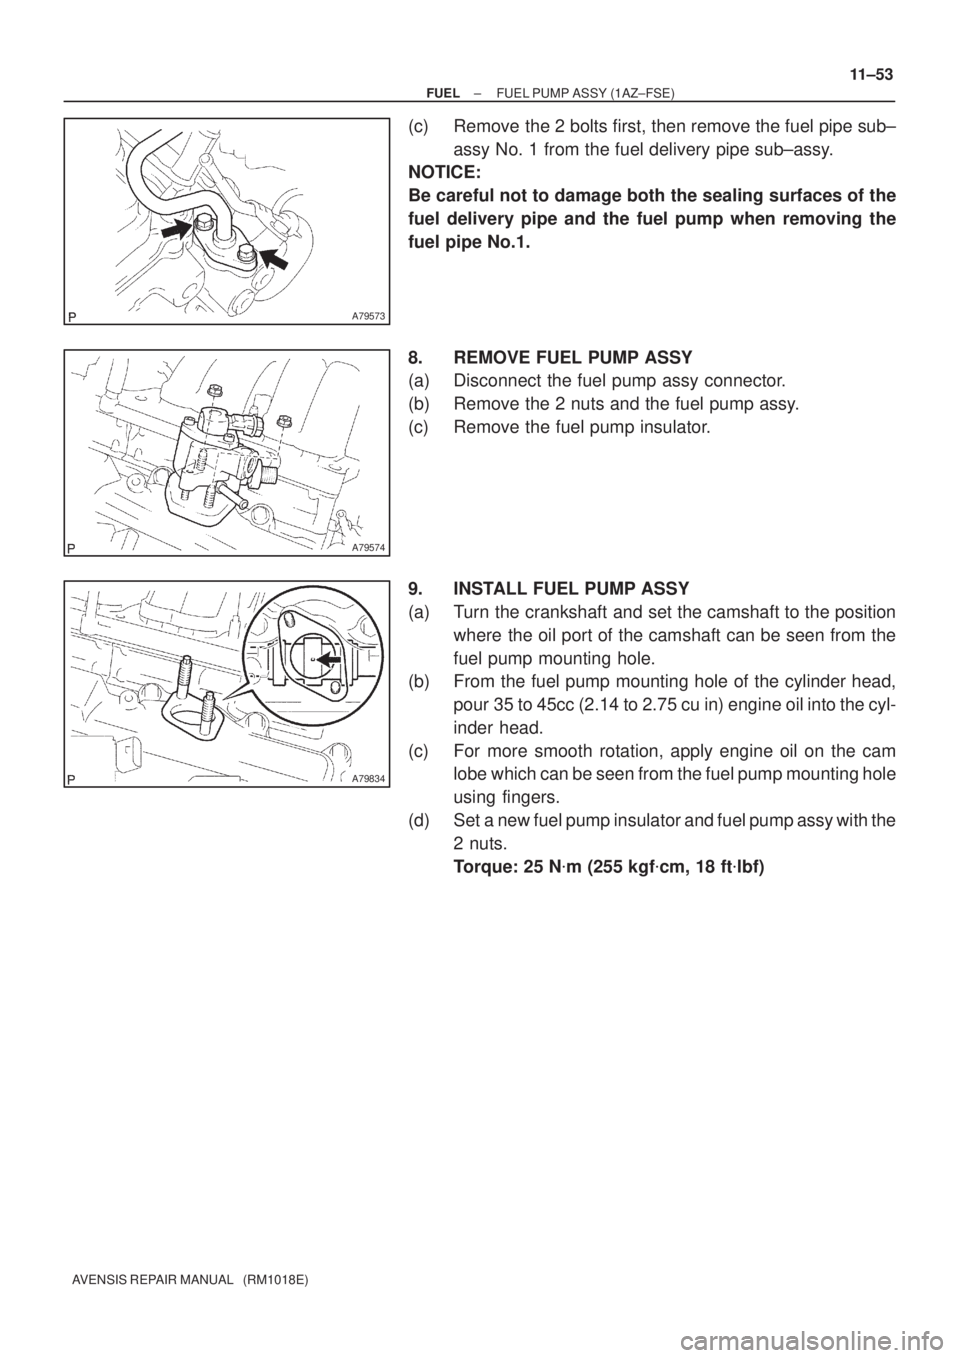 TOYOTA AVENSIS 2005  Service Repair Manual A79573
A79574
A79834
± FUELFUEL PUMP ASSY (1AZ±FSE)
11±53
AVENSIS REPAIR MANUAL   (RM1018E)
(c) Remove the 2 bolts first, then remove the fuel pipe sub±
assy No. 1 from the fuel delivery pipe sub�